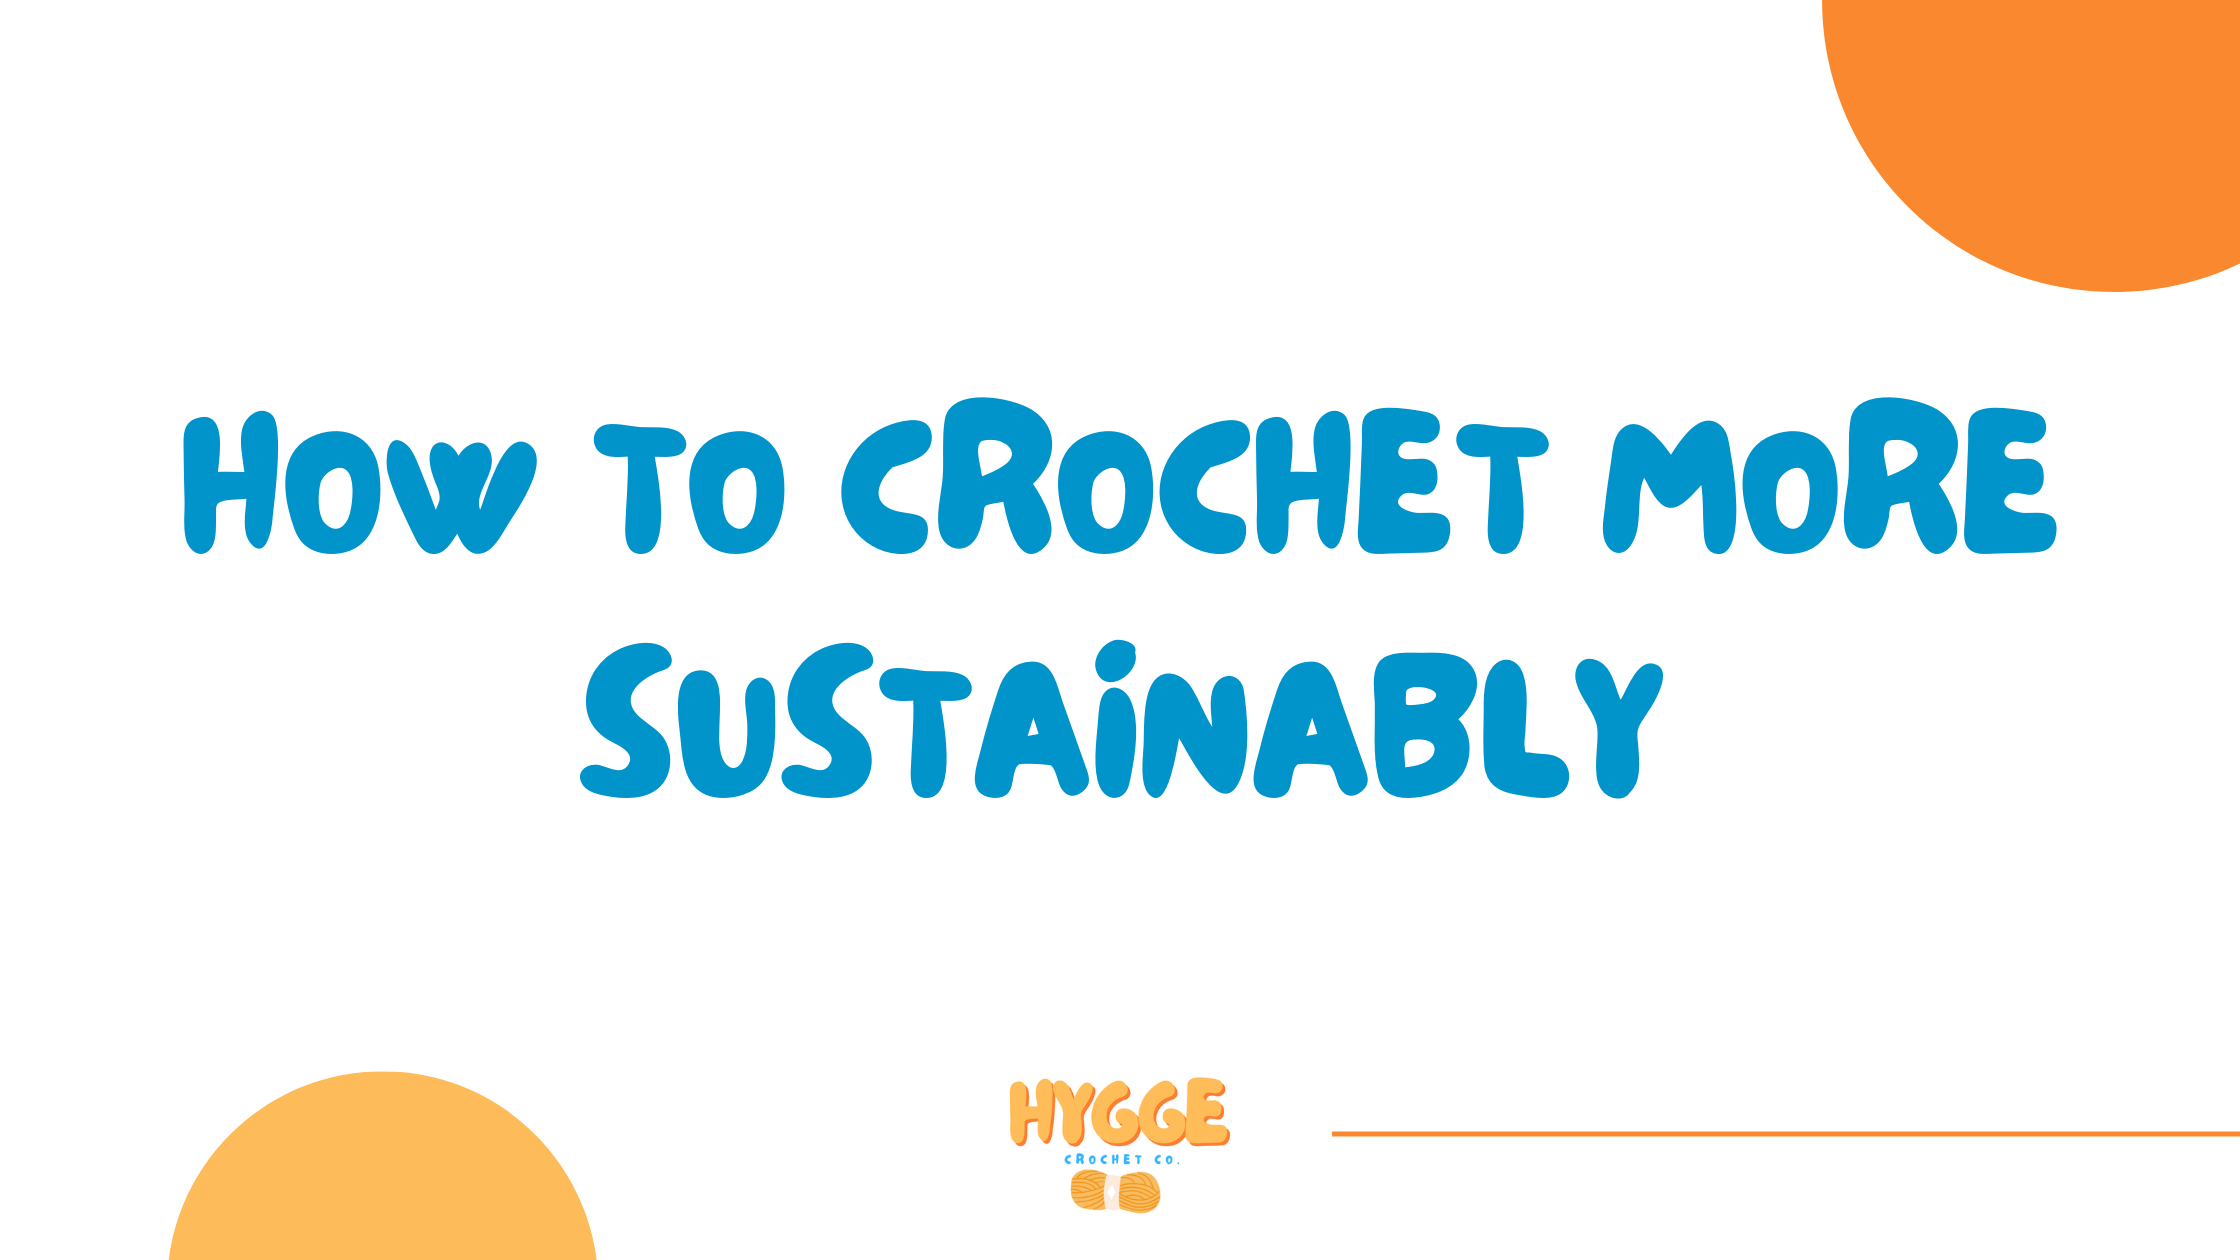 How to Crochet More Sustainably